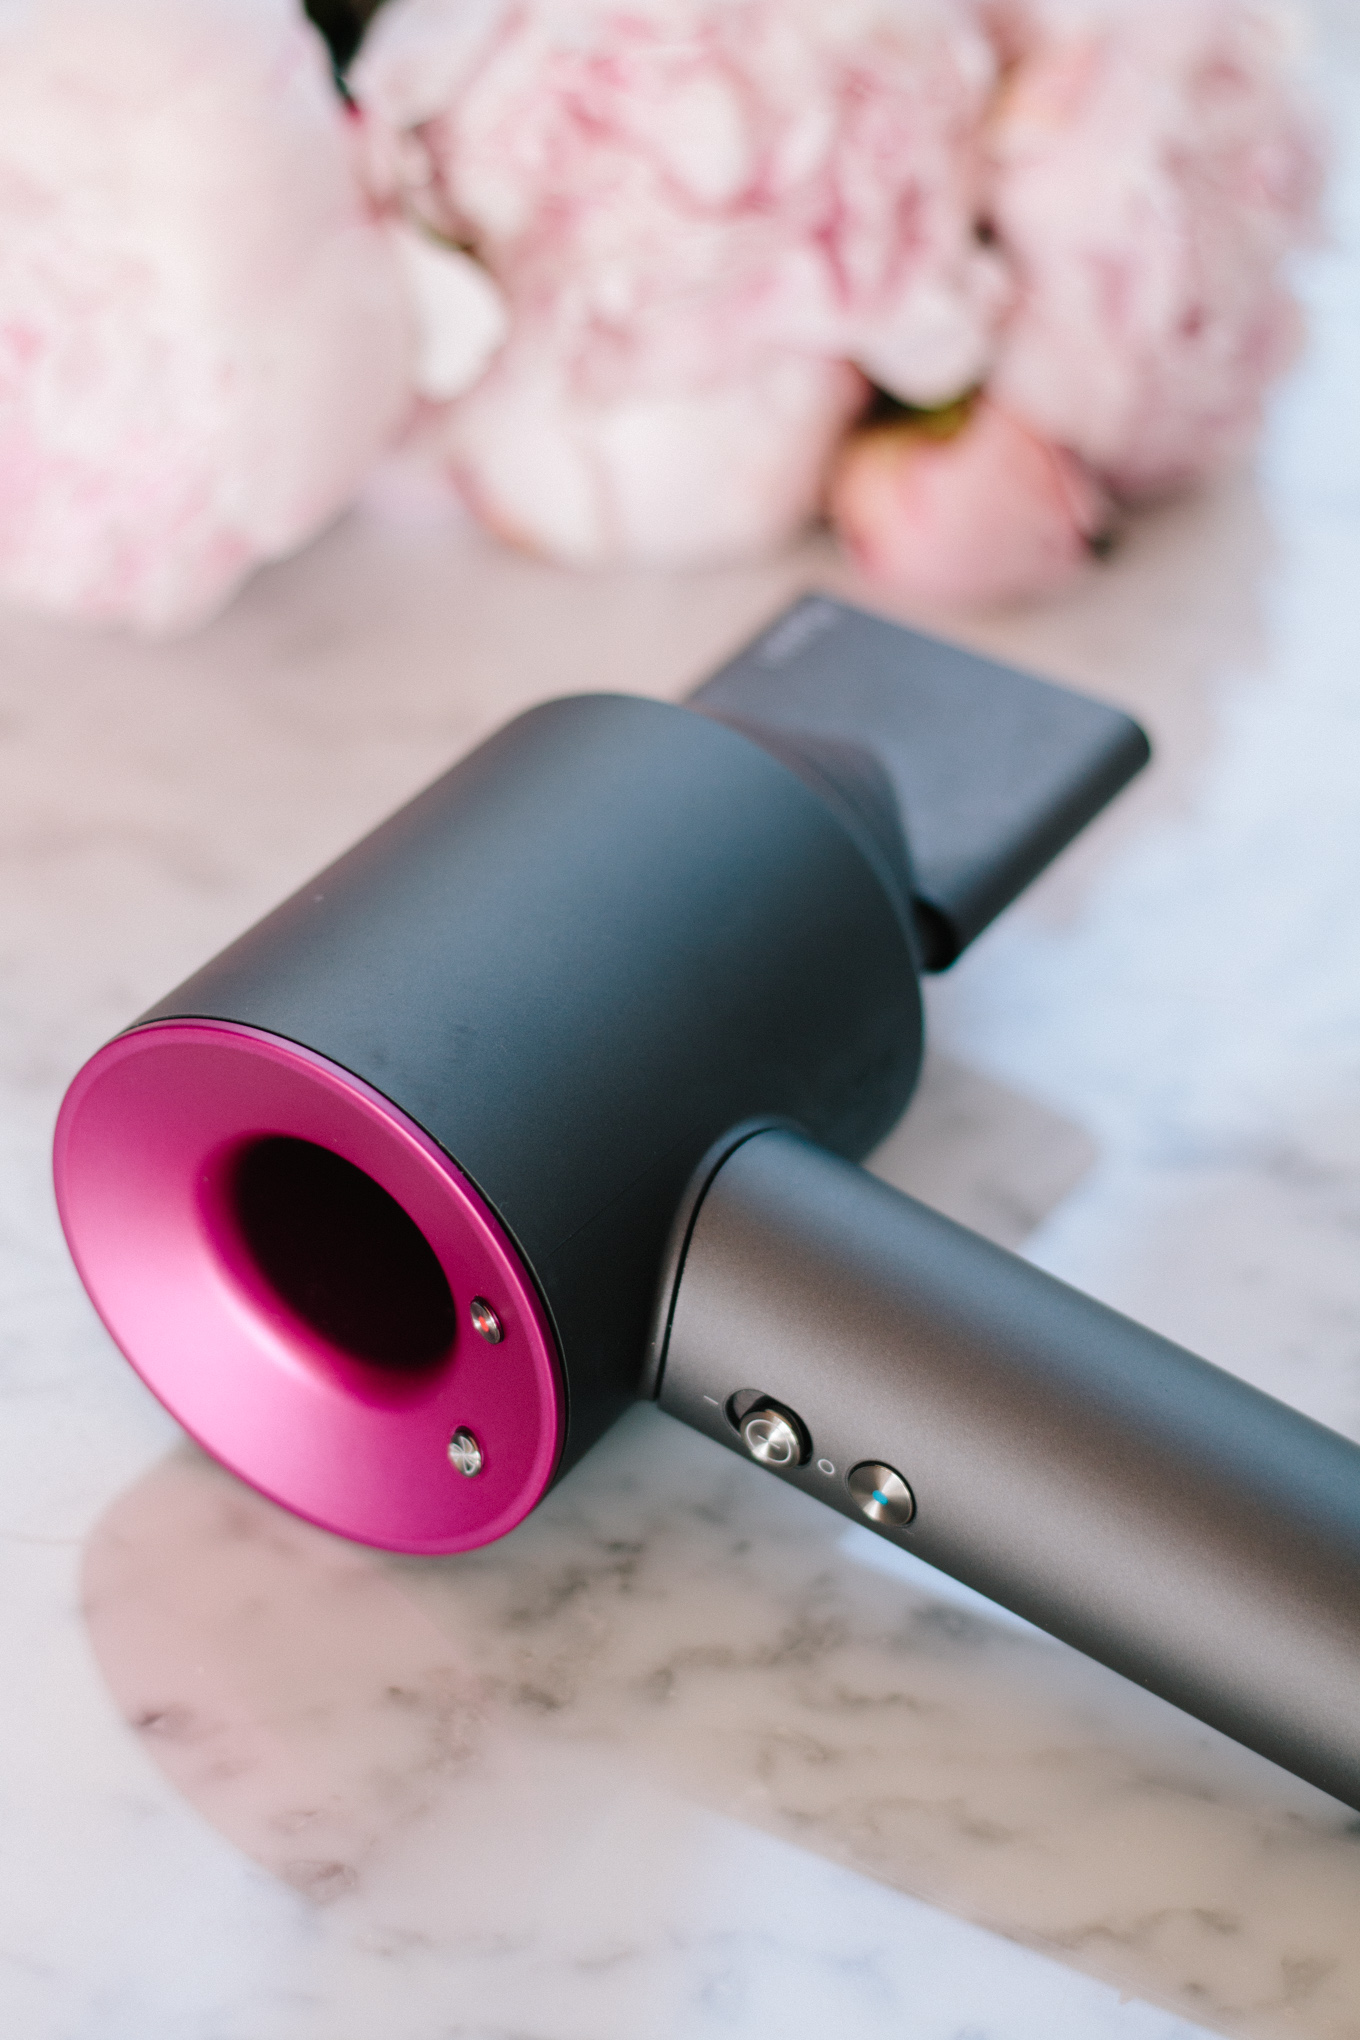 Dyson Supersonic Review, Dyson Hairdryer